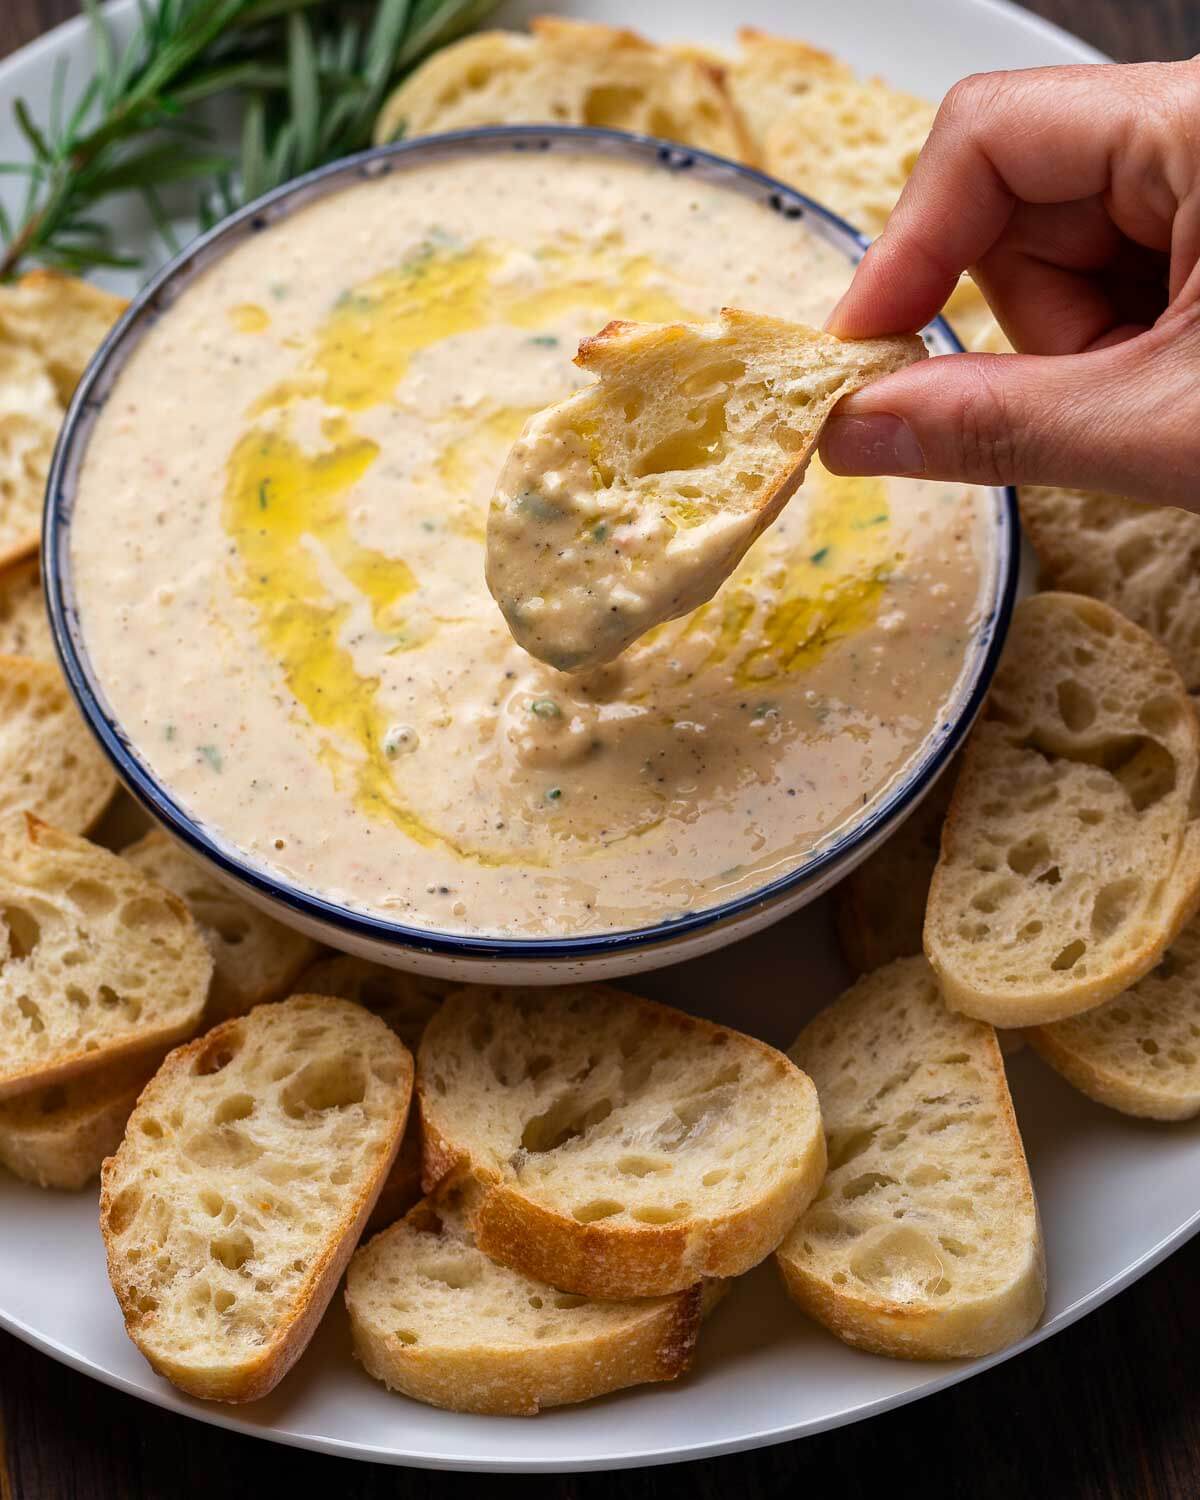 Hand holding bread dipped into cannellini bean dip.